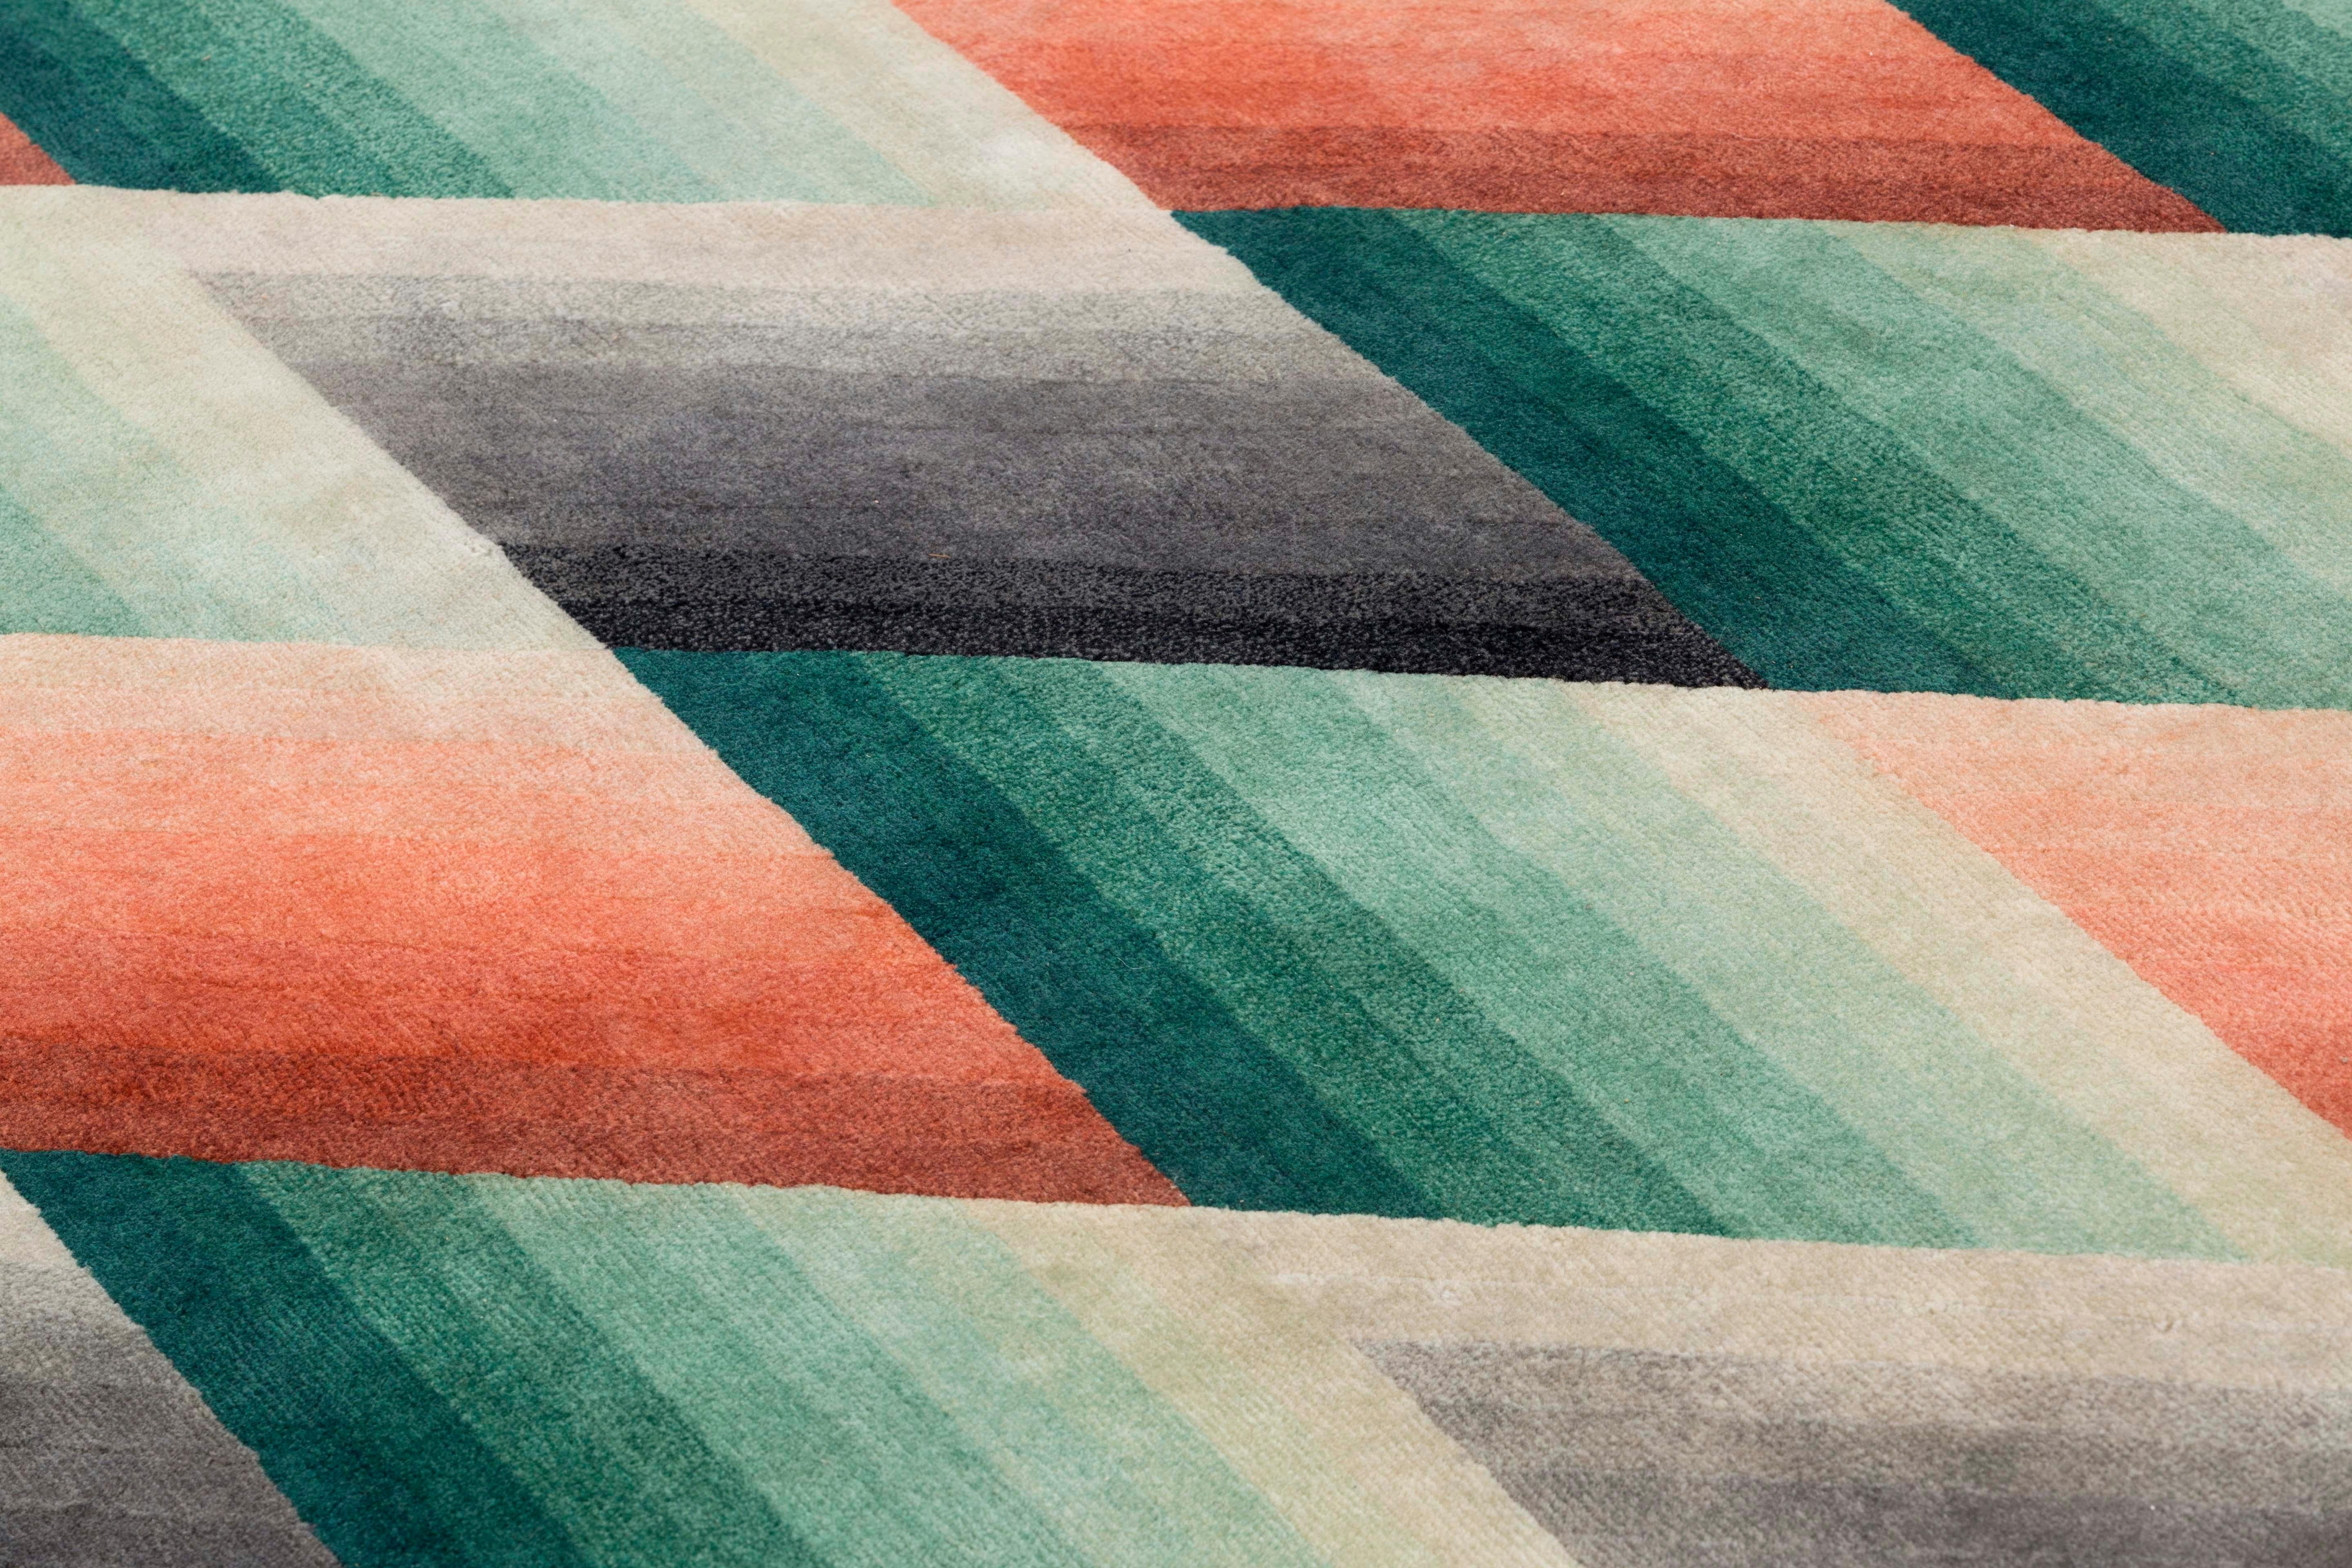 Patricia Urquiola creates another modern classic accessory. Mirage, the new collection of rugs designed for GAN, is destined to become a treasured icon. Color, geometry and superimposition are combined with this rug of pure New Zealand wool